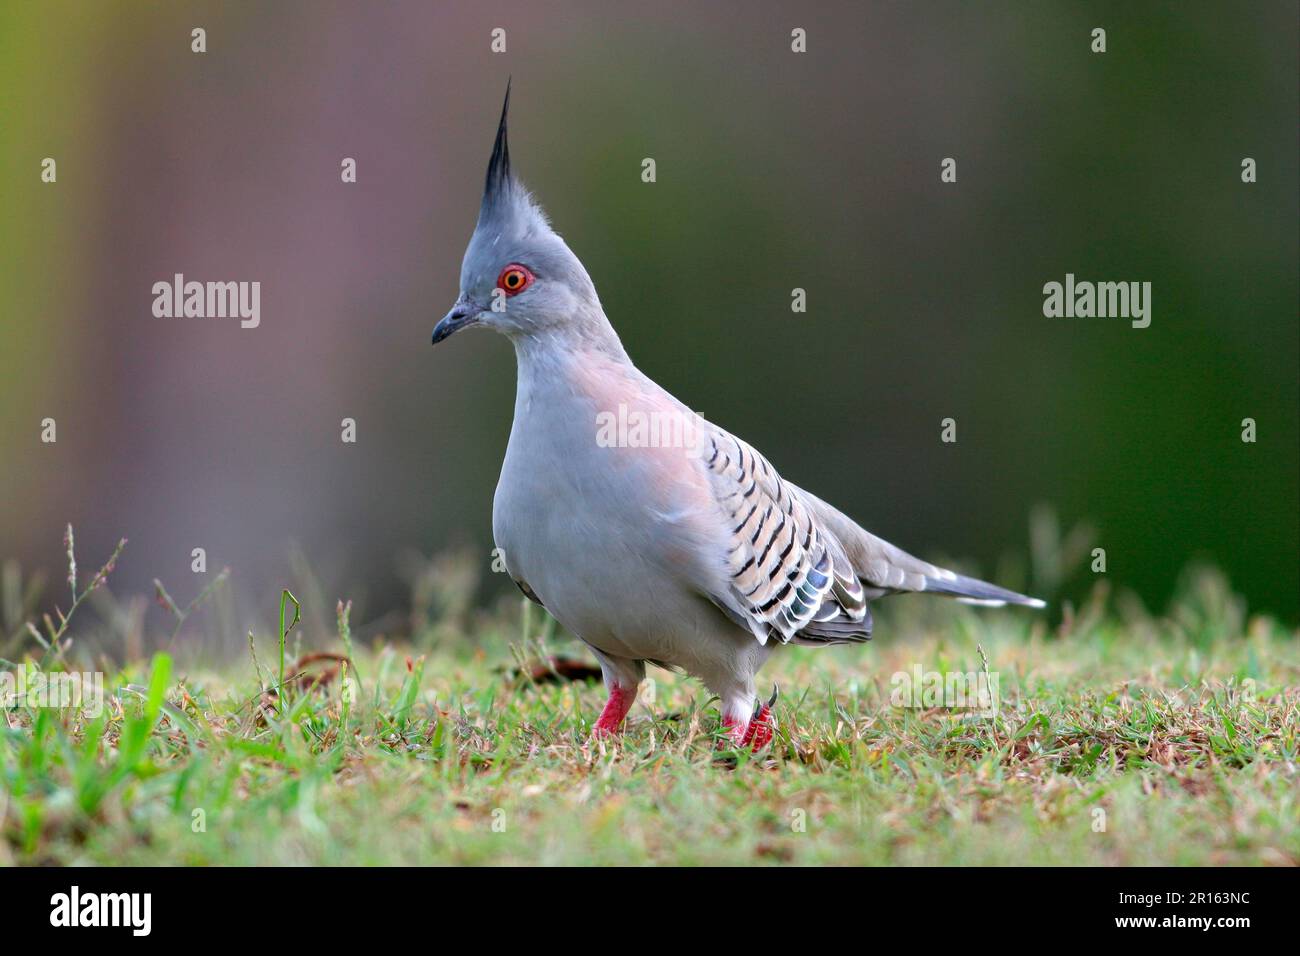 Geophaps lophotes, Crested Pigeon, crested pigeons (Ocyphaps lophotes), Crested Pigeon, Crested Pigeons, Pigeons, Animals, Birds, Crested Pigeon Stock Photo